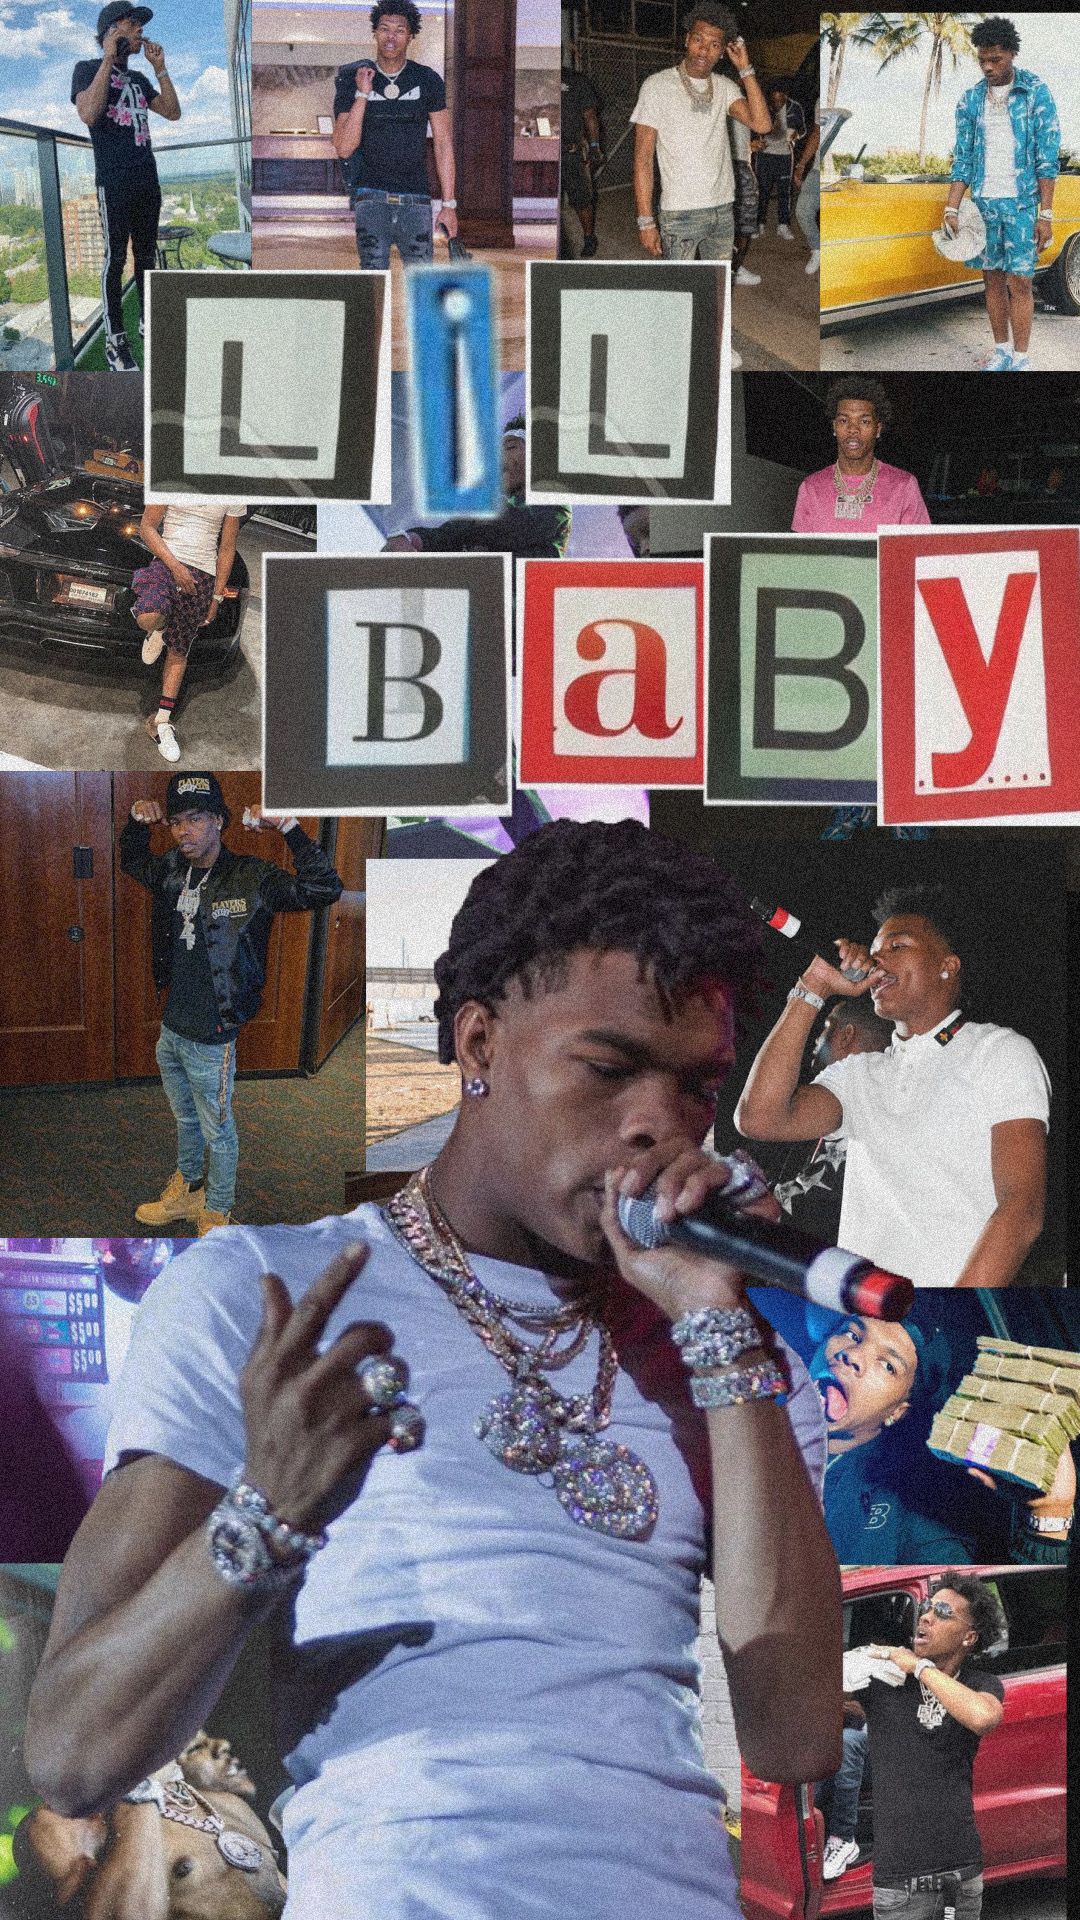 Lil Baby Rapper Wallpapers  Top Free Lil Baby Rapper Backgrounds   WallpaperAccess